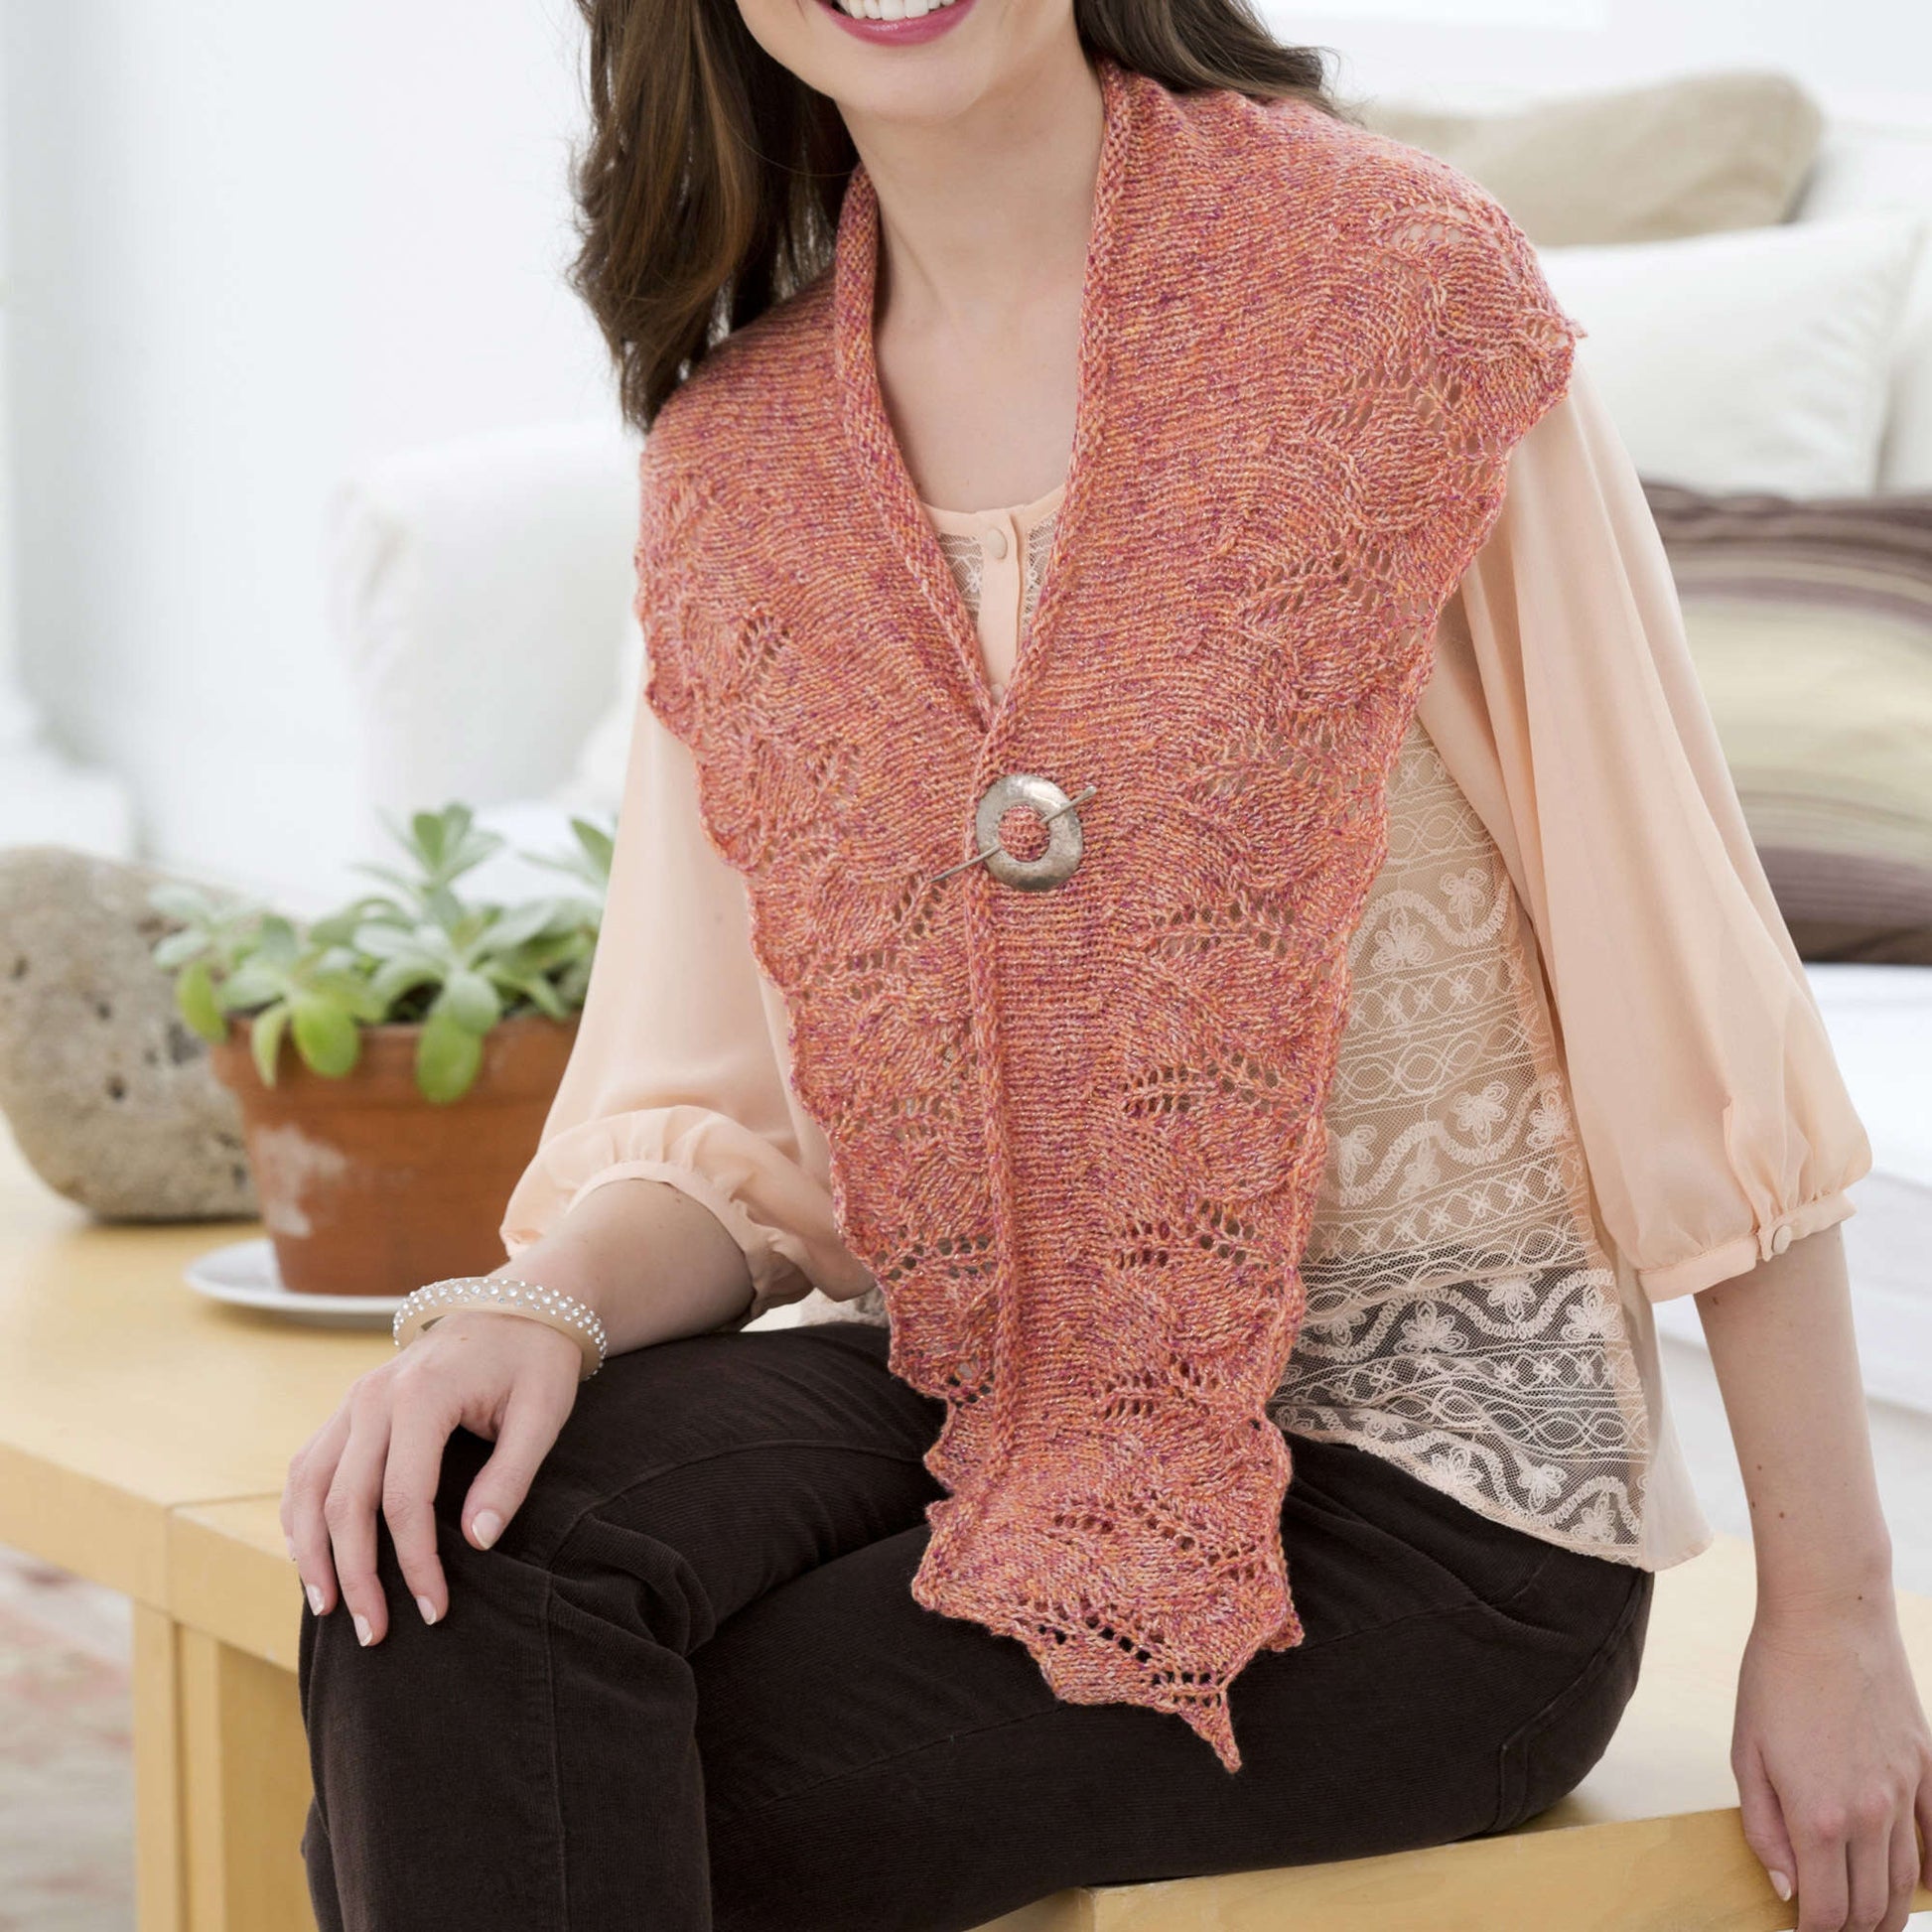 Free Red Heart Lily Crescent Shawlette Knit Pattern